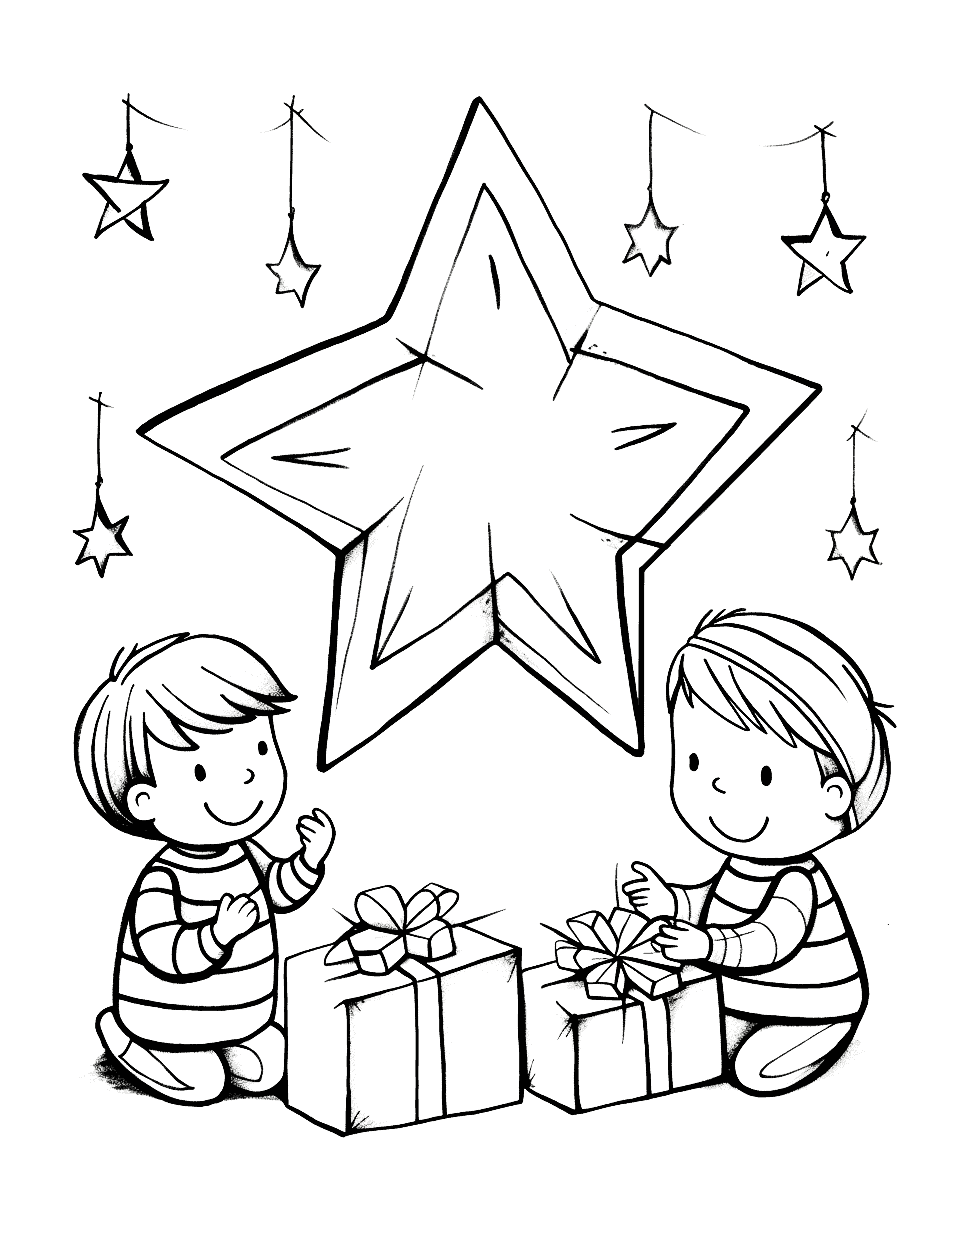 Holiday Origami Christmas Coloring Page - Kids making holiday origami, like paper stars.